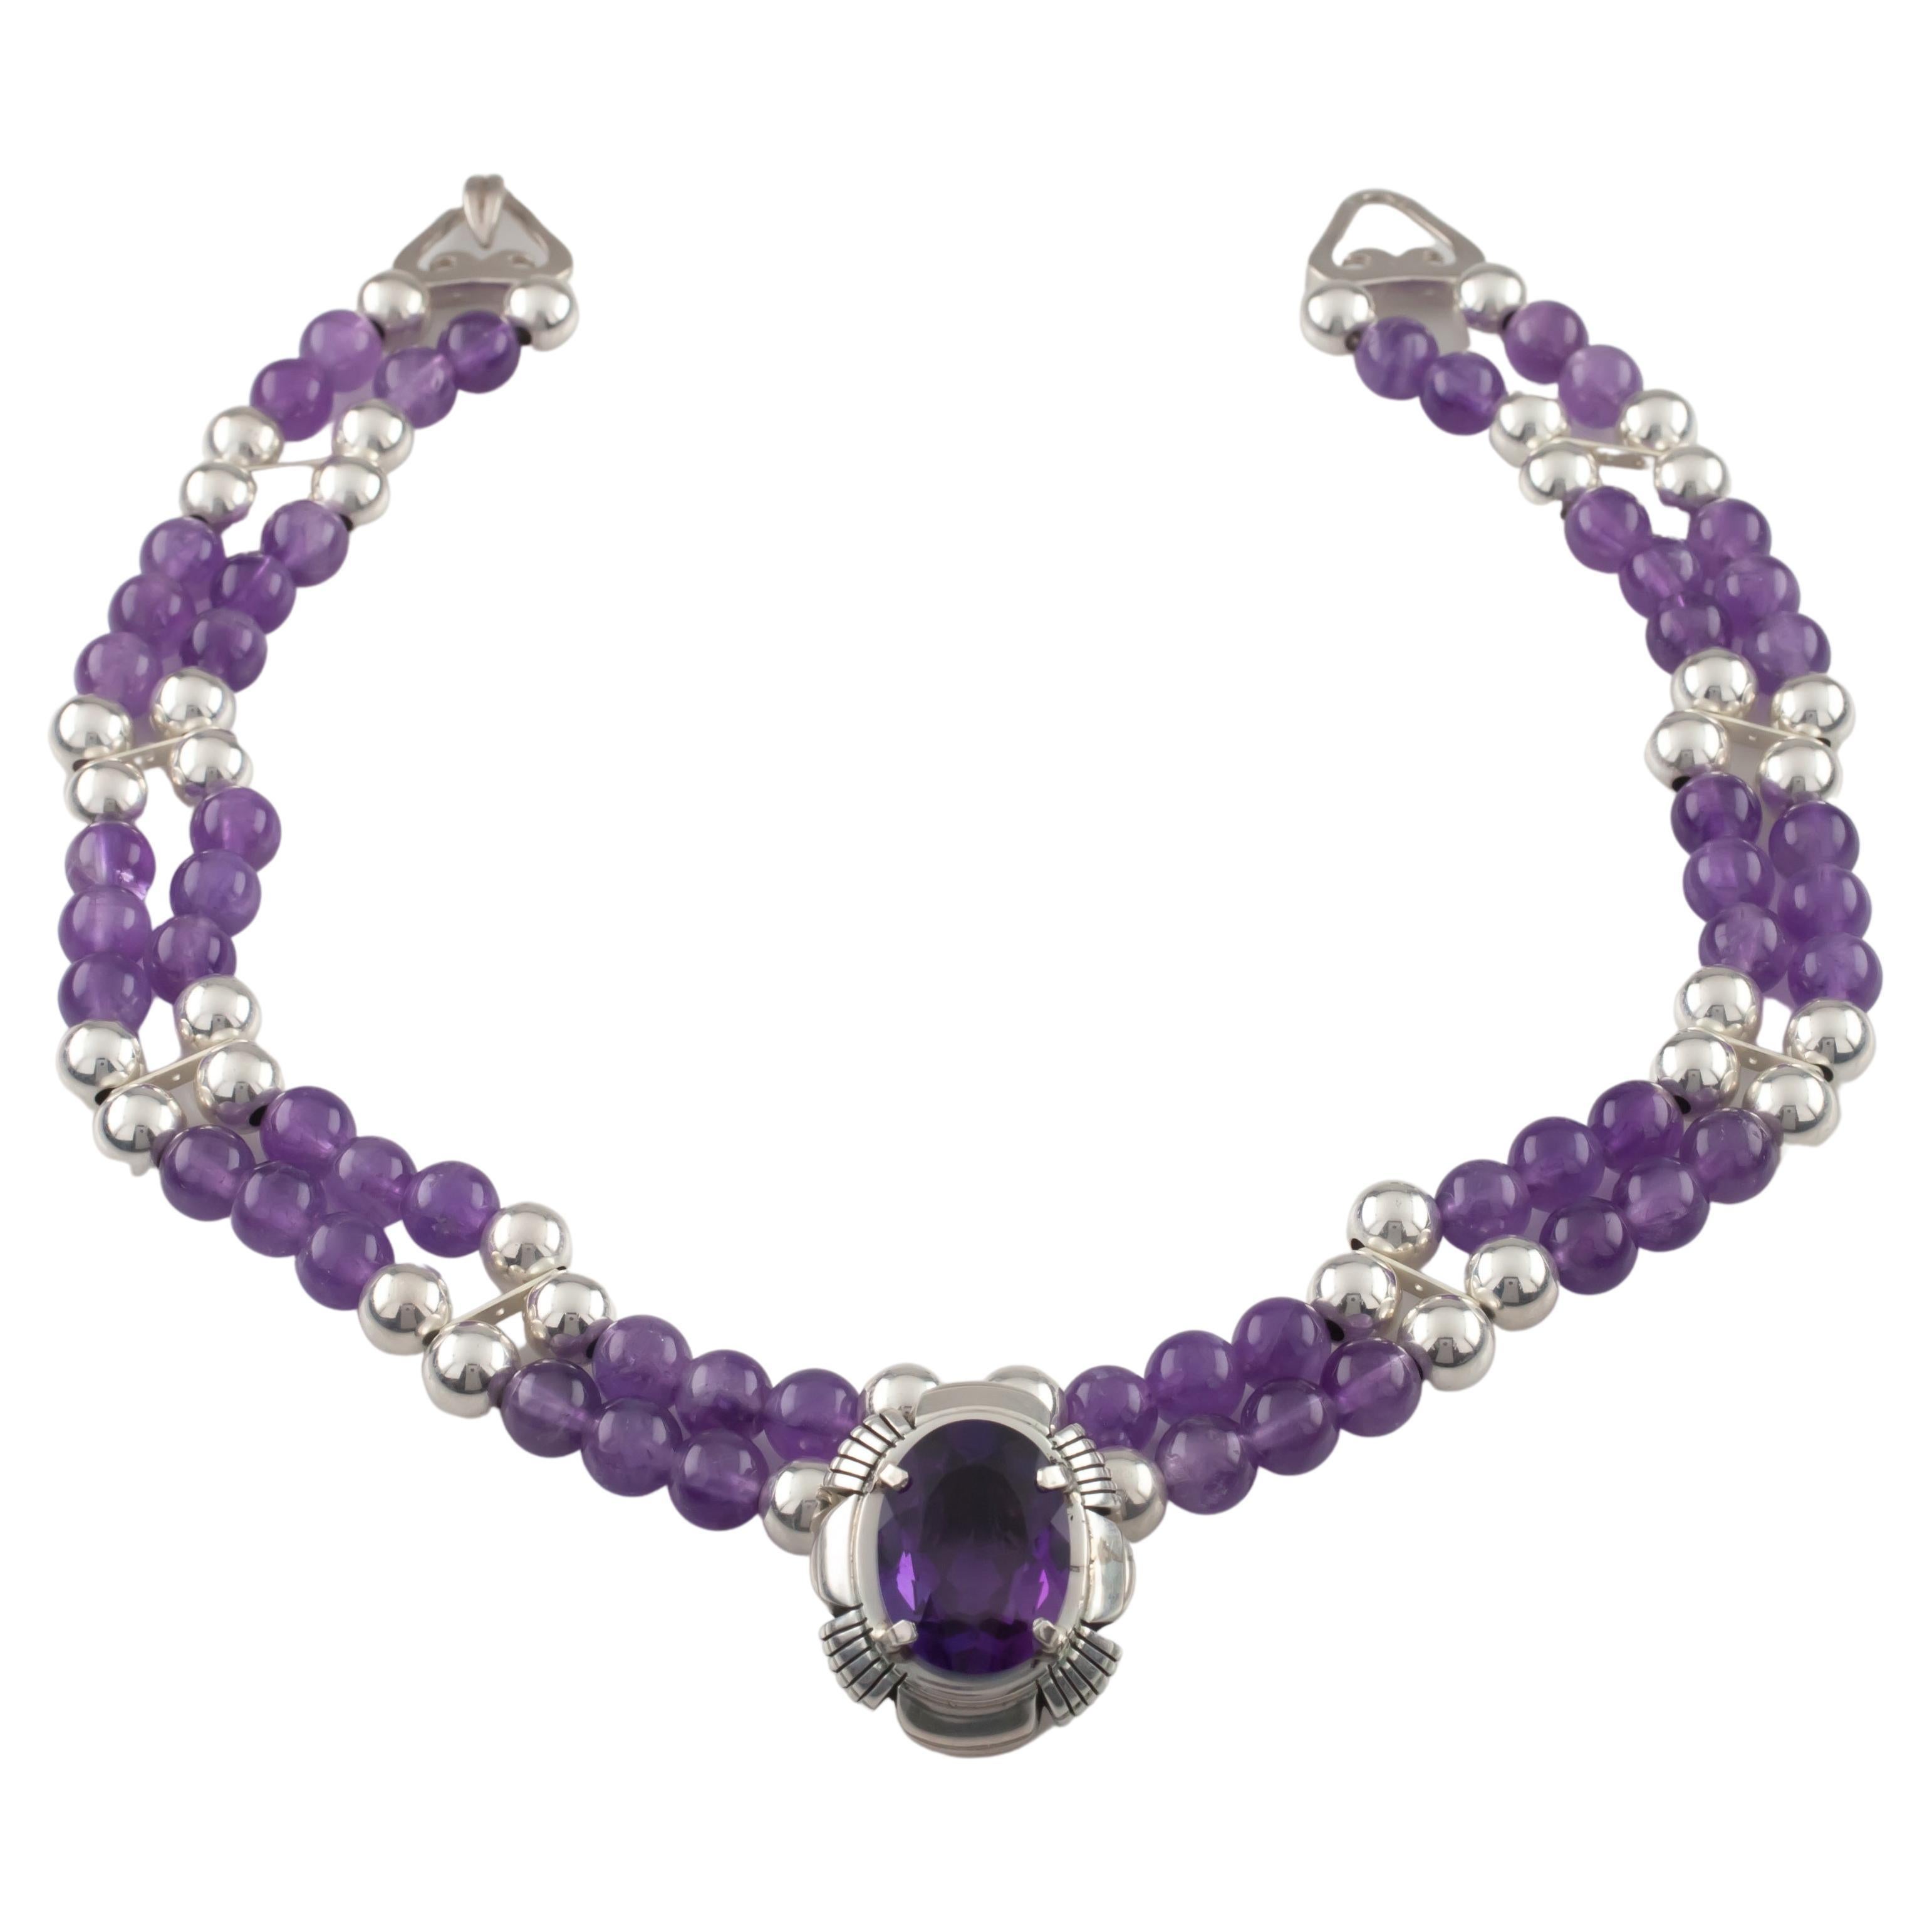 Carl Quintana Navajo Amethyst and Sterling Silver Necklace